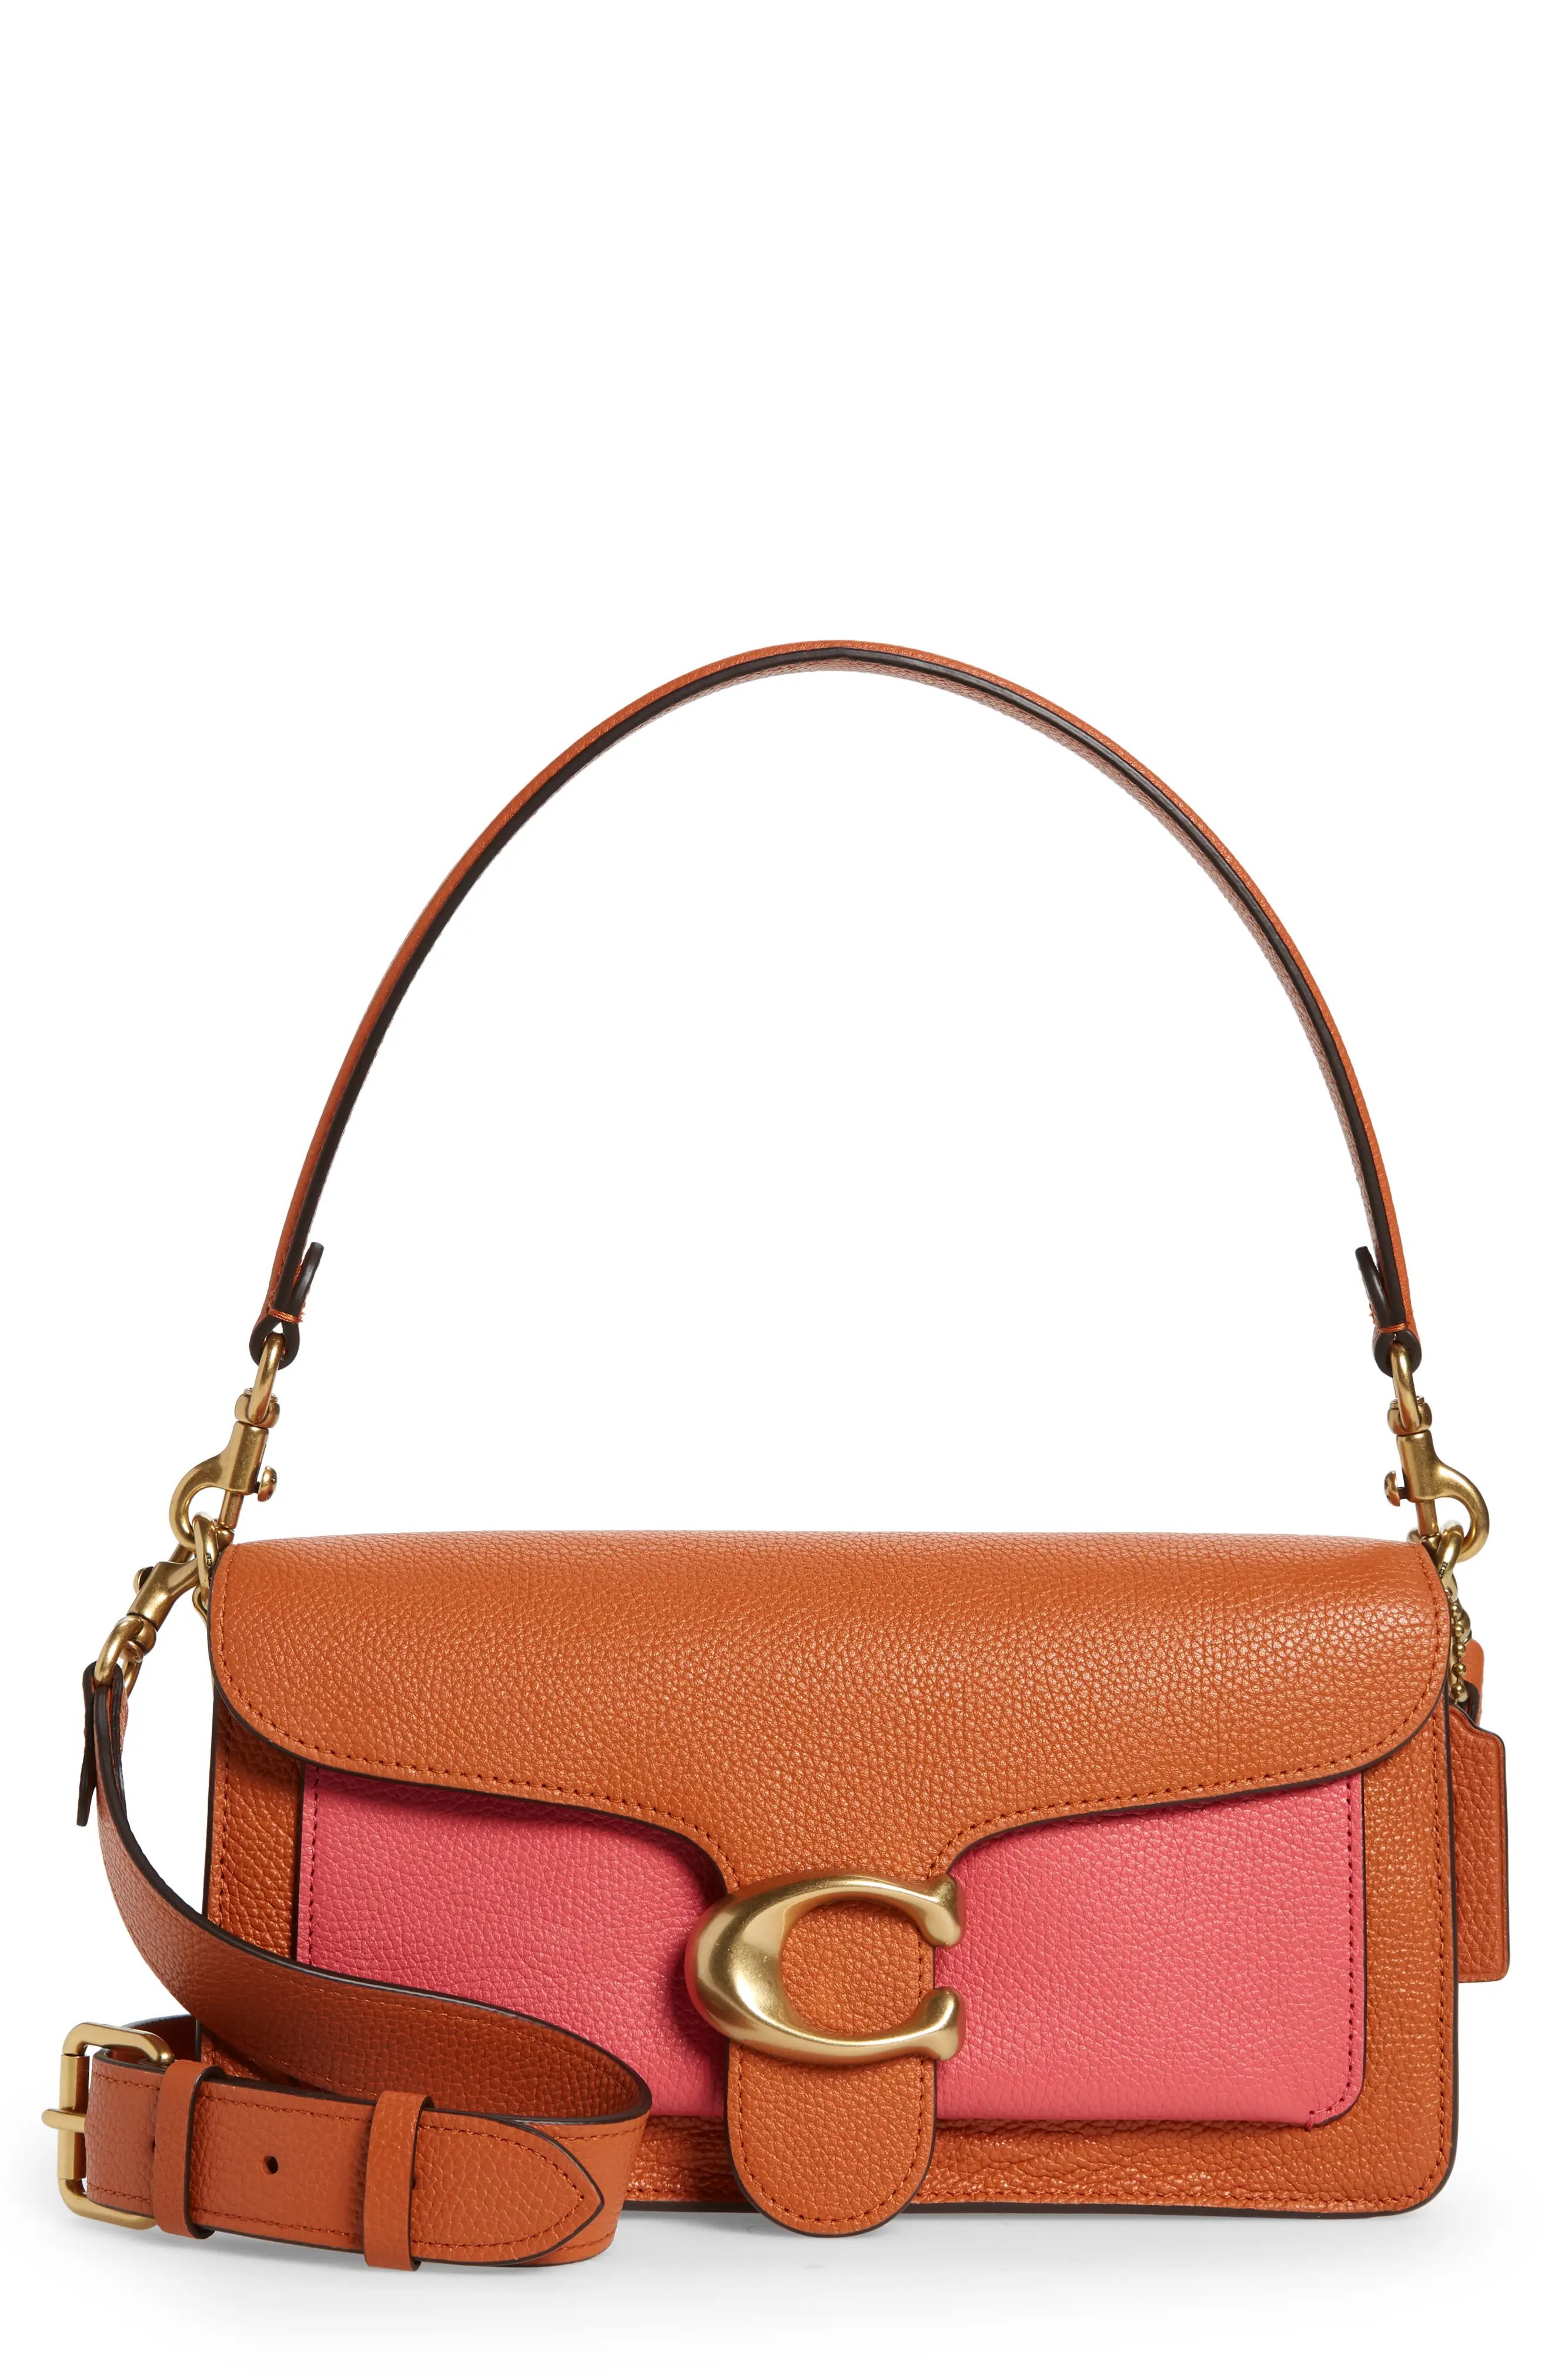 Coach Tabby 26 Colorblock Leather Crossbody Bag - Pink | Nordstrom